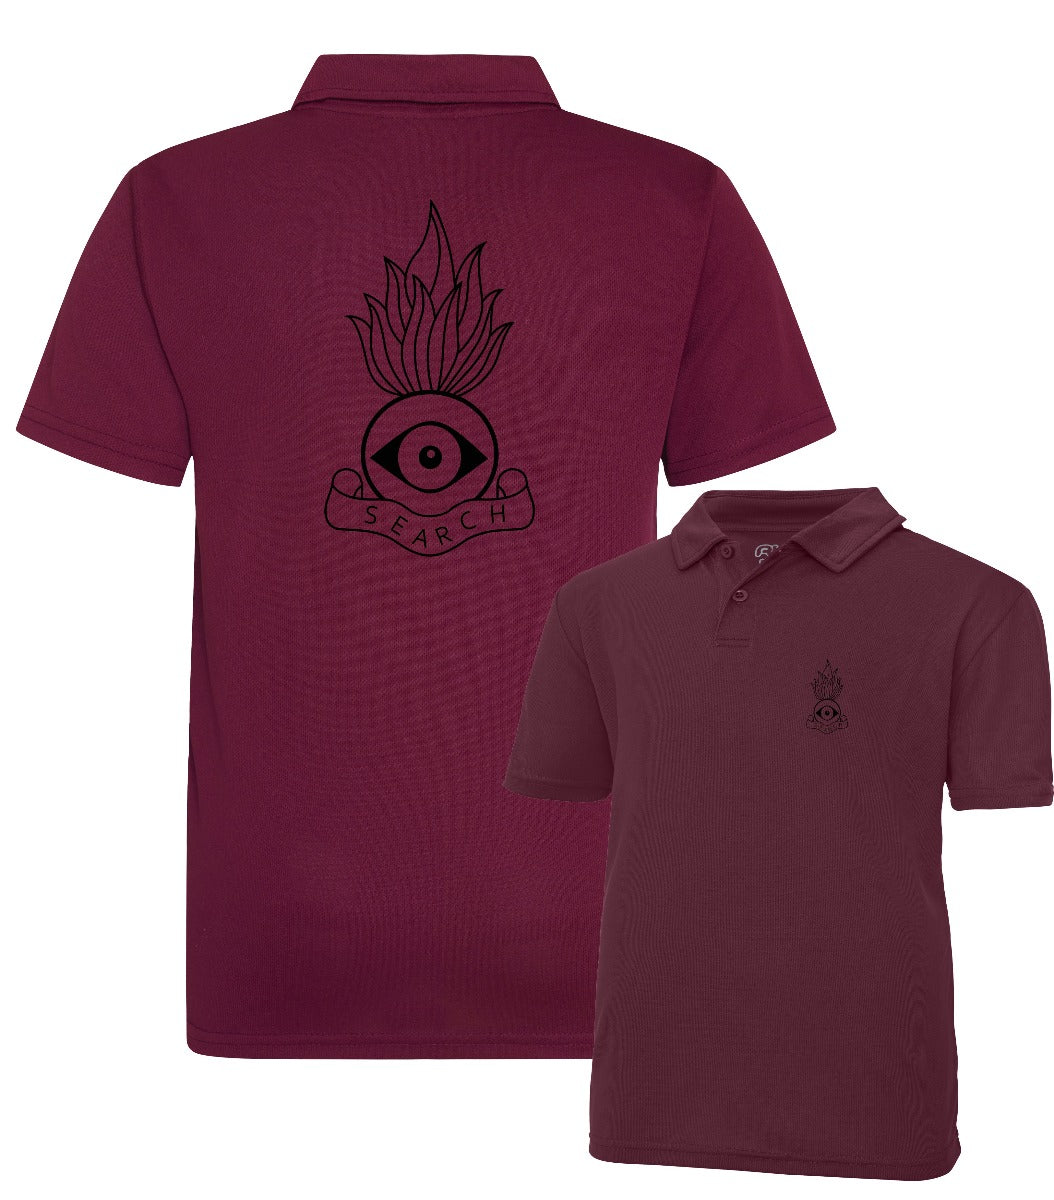 Double Printed RE Search Wicking Polo Shirt